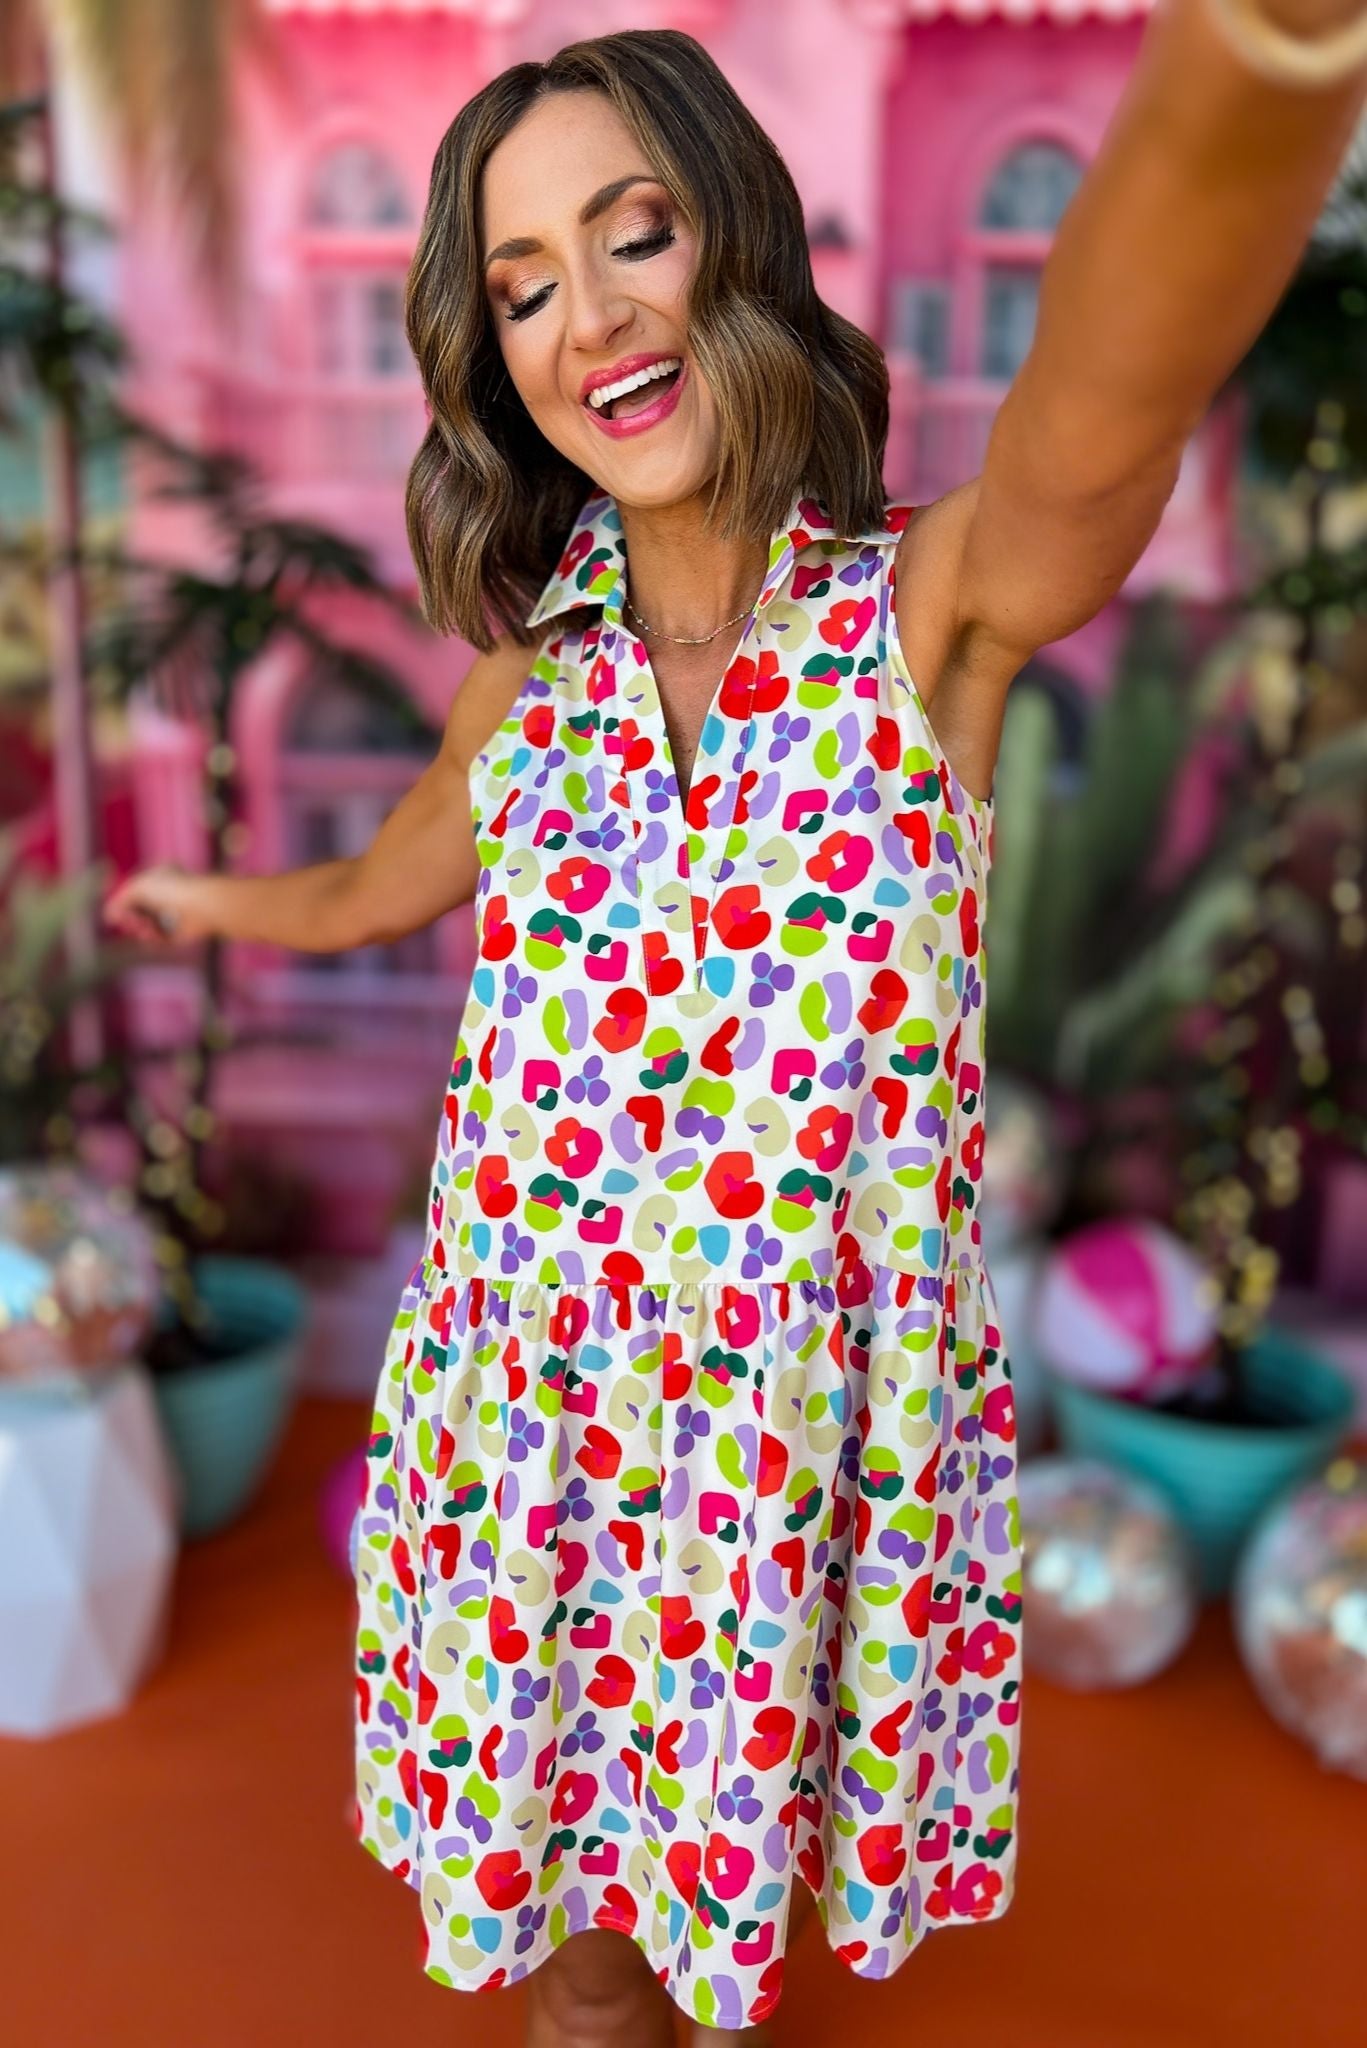 SSYS The Kendall Sleeveless Collared Dress In Animal, ssys the label, spring break dress, spring break style, spring fashion affordable fashion, elevated style, bright style, printed dress, mom style, shop style your senses by mallory fitzsimmons, ssys by mallory fitzsimmons